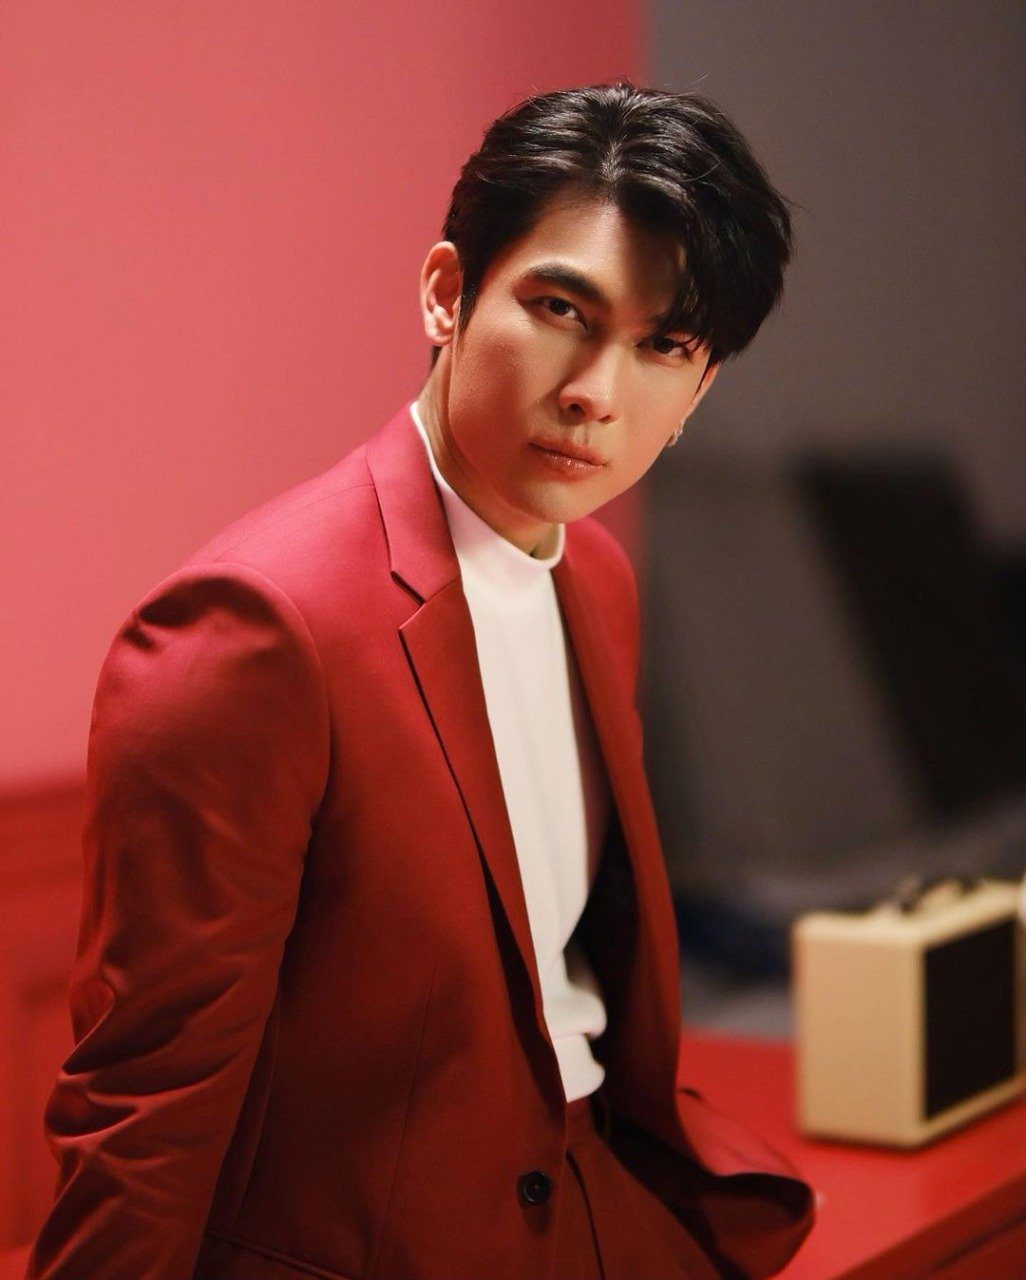 Mew Suppasit: Rising Star of the Thai Entertainment Industry